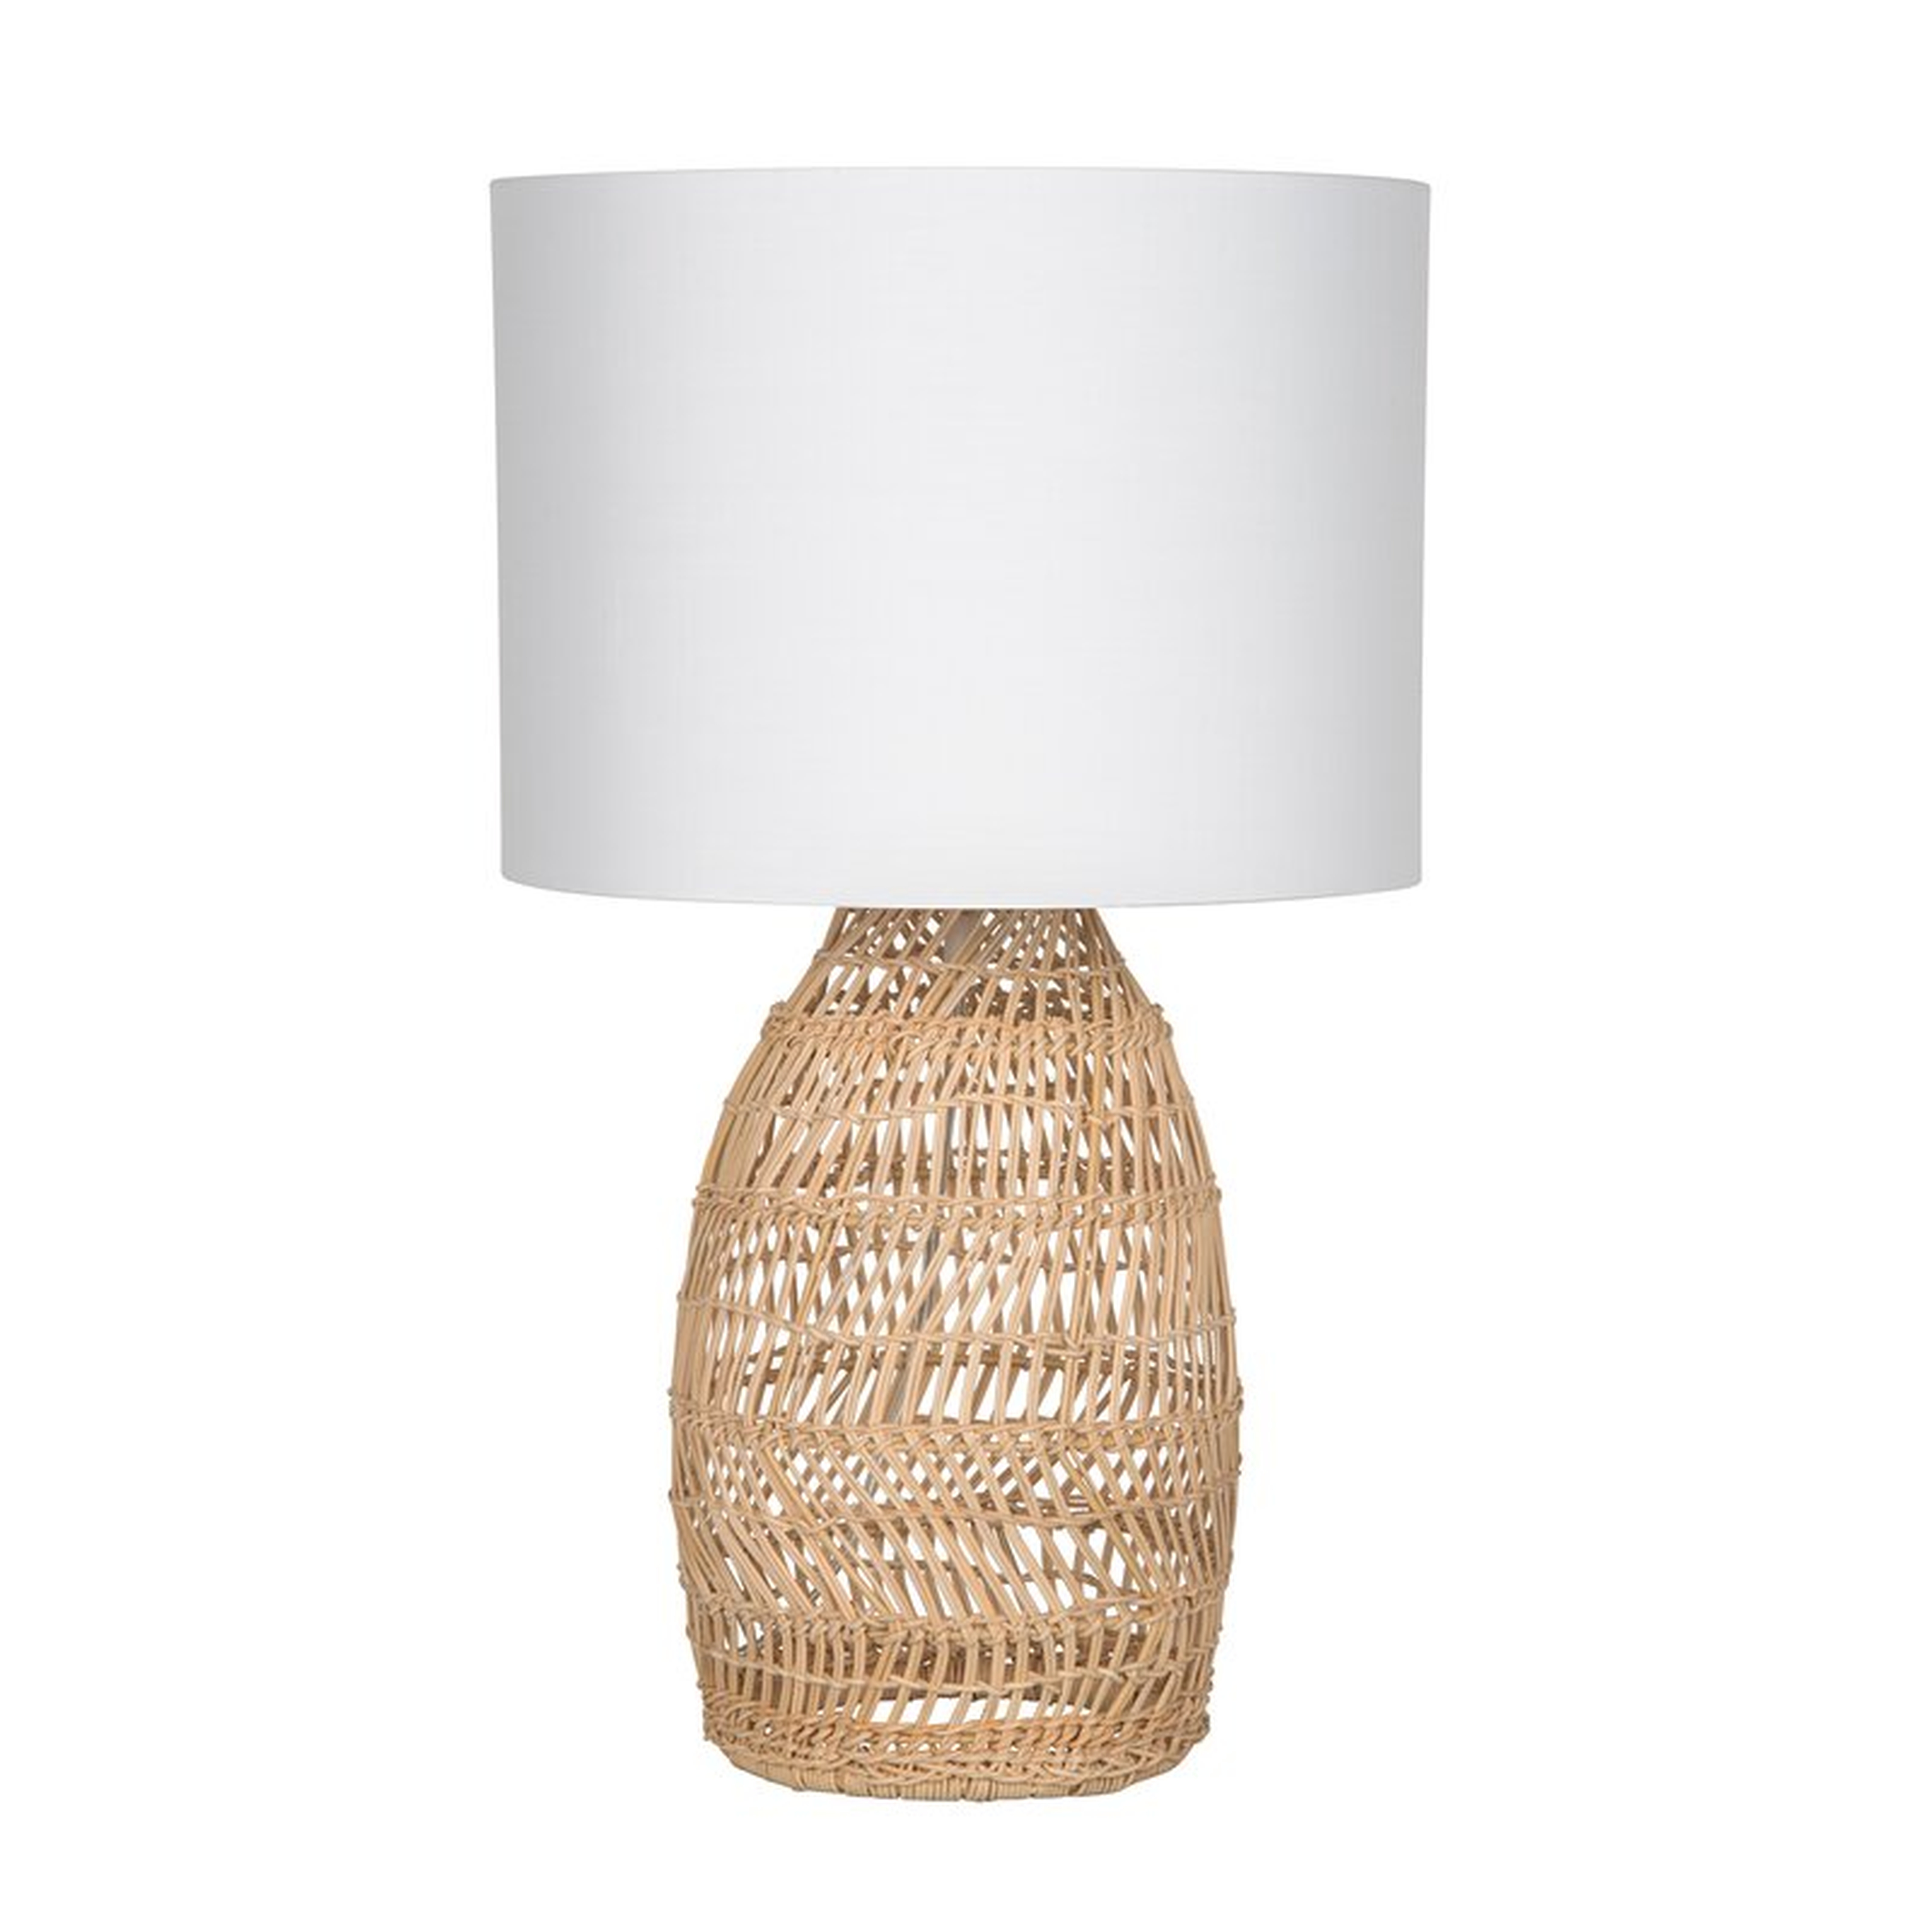 Luhu Open Weave Cane Rib Table Lamp - Natural With White Cotton Canvas Shade - Wayfair